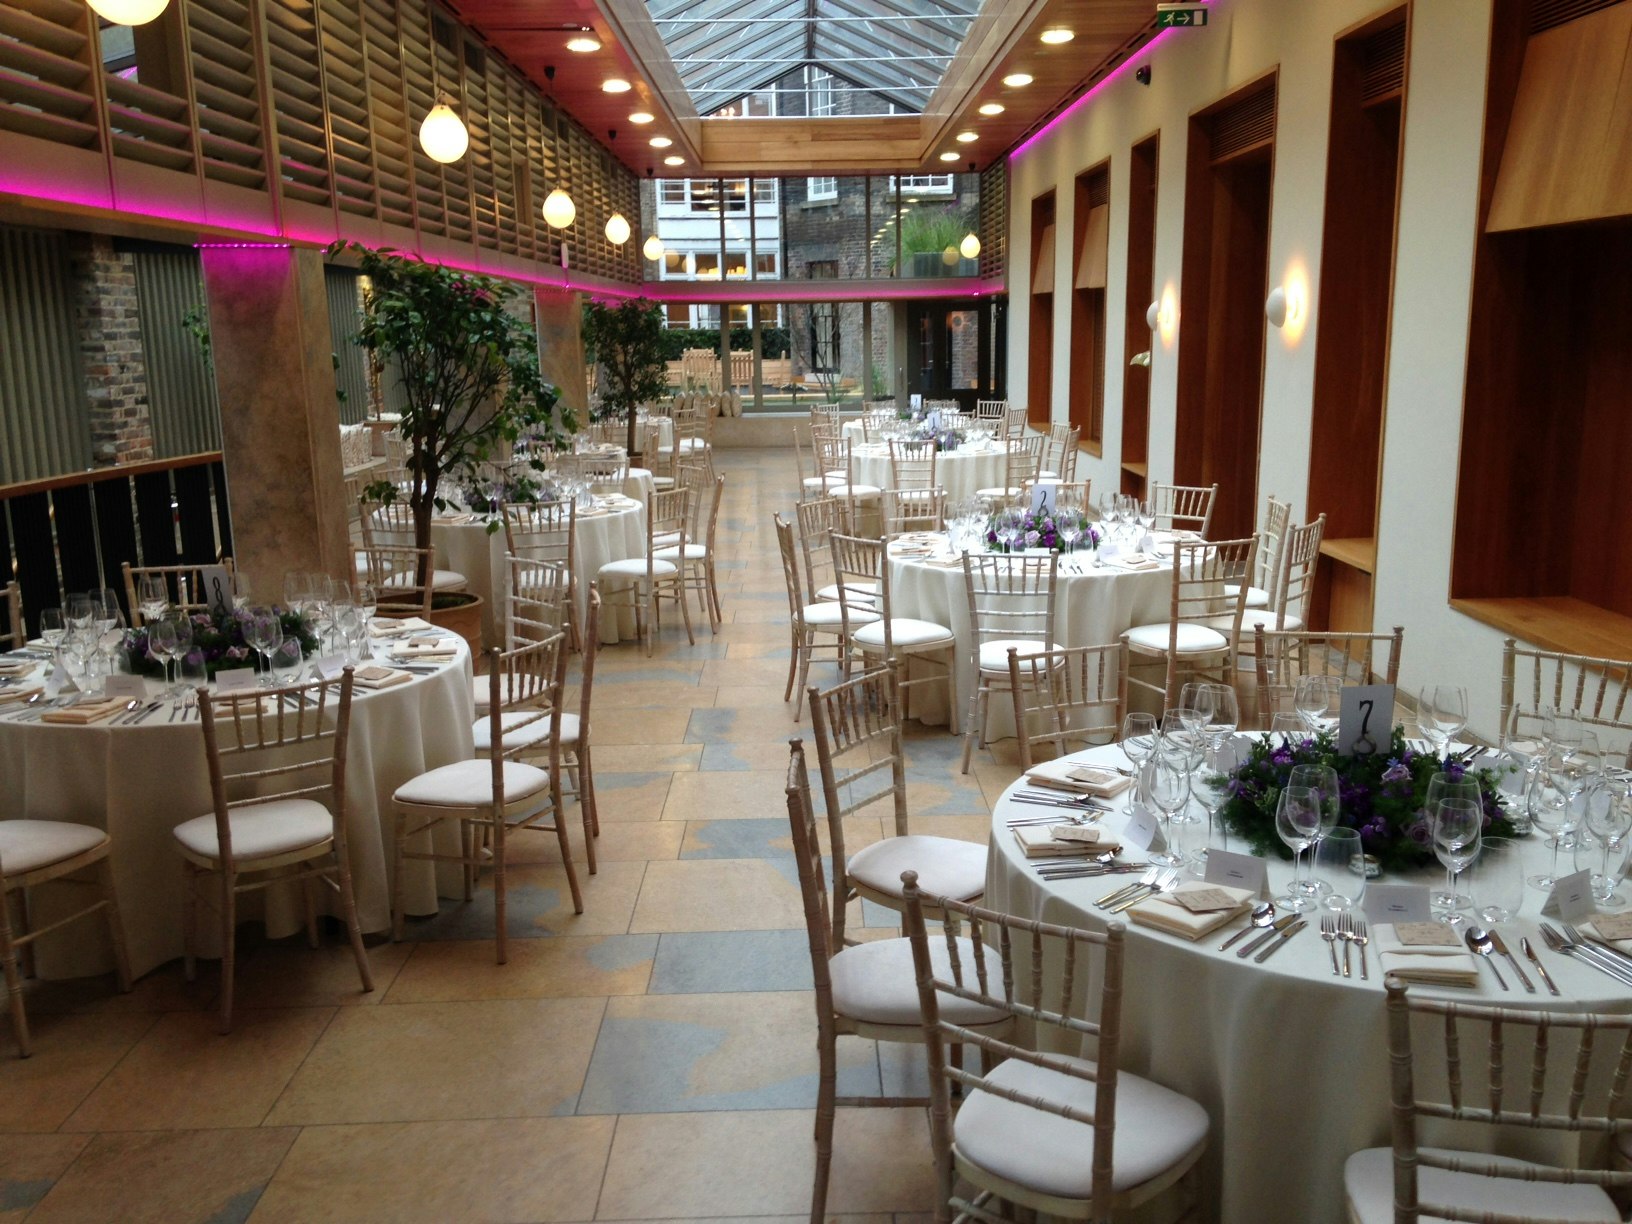 Restaurants With Private Rooms Venues in London - No.11 Cavendish Square